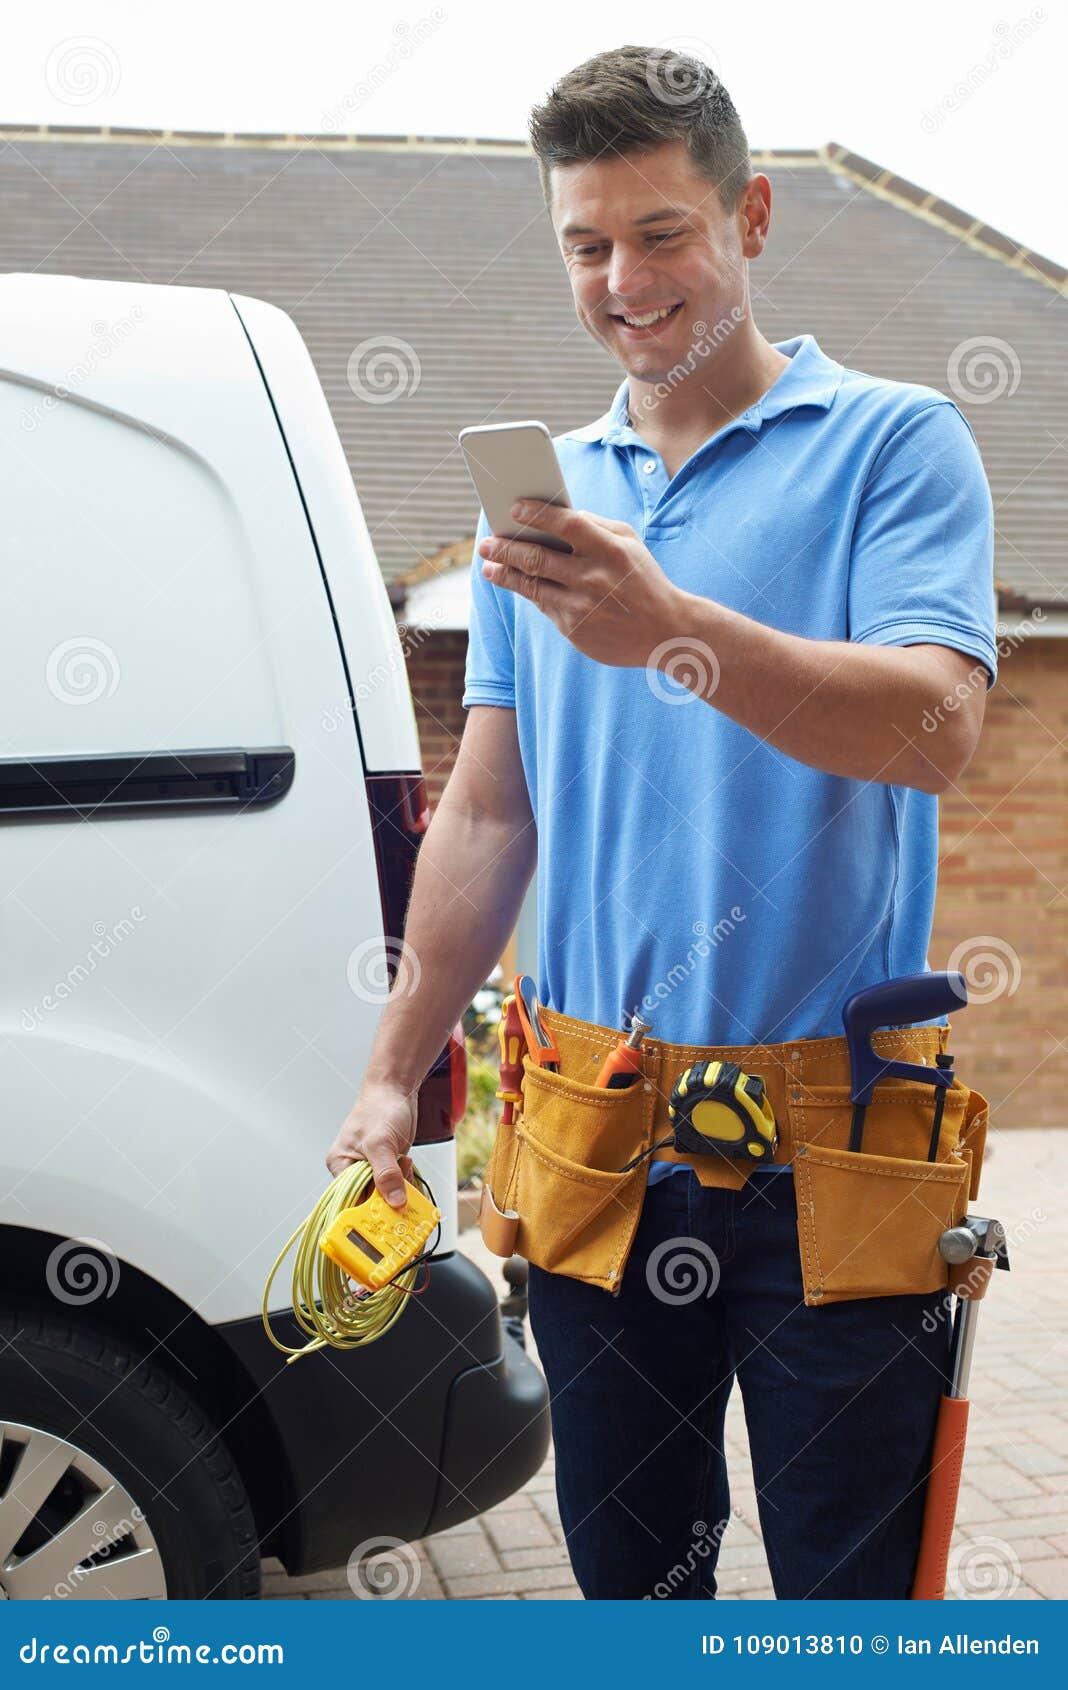 electrician with van texting on mobile phone outside house